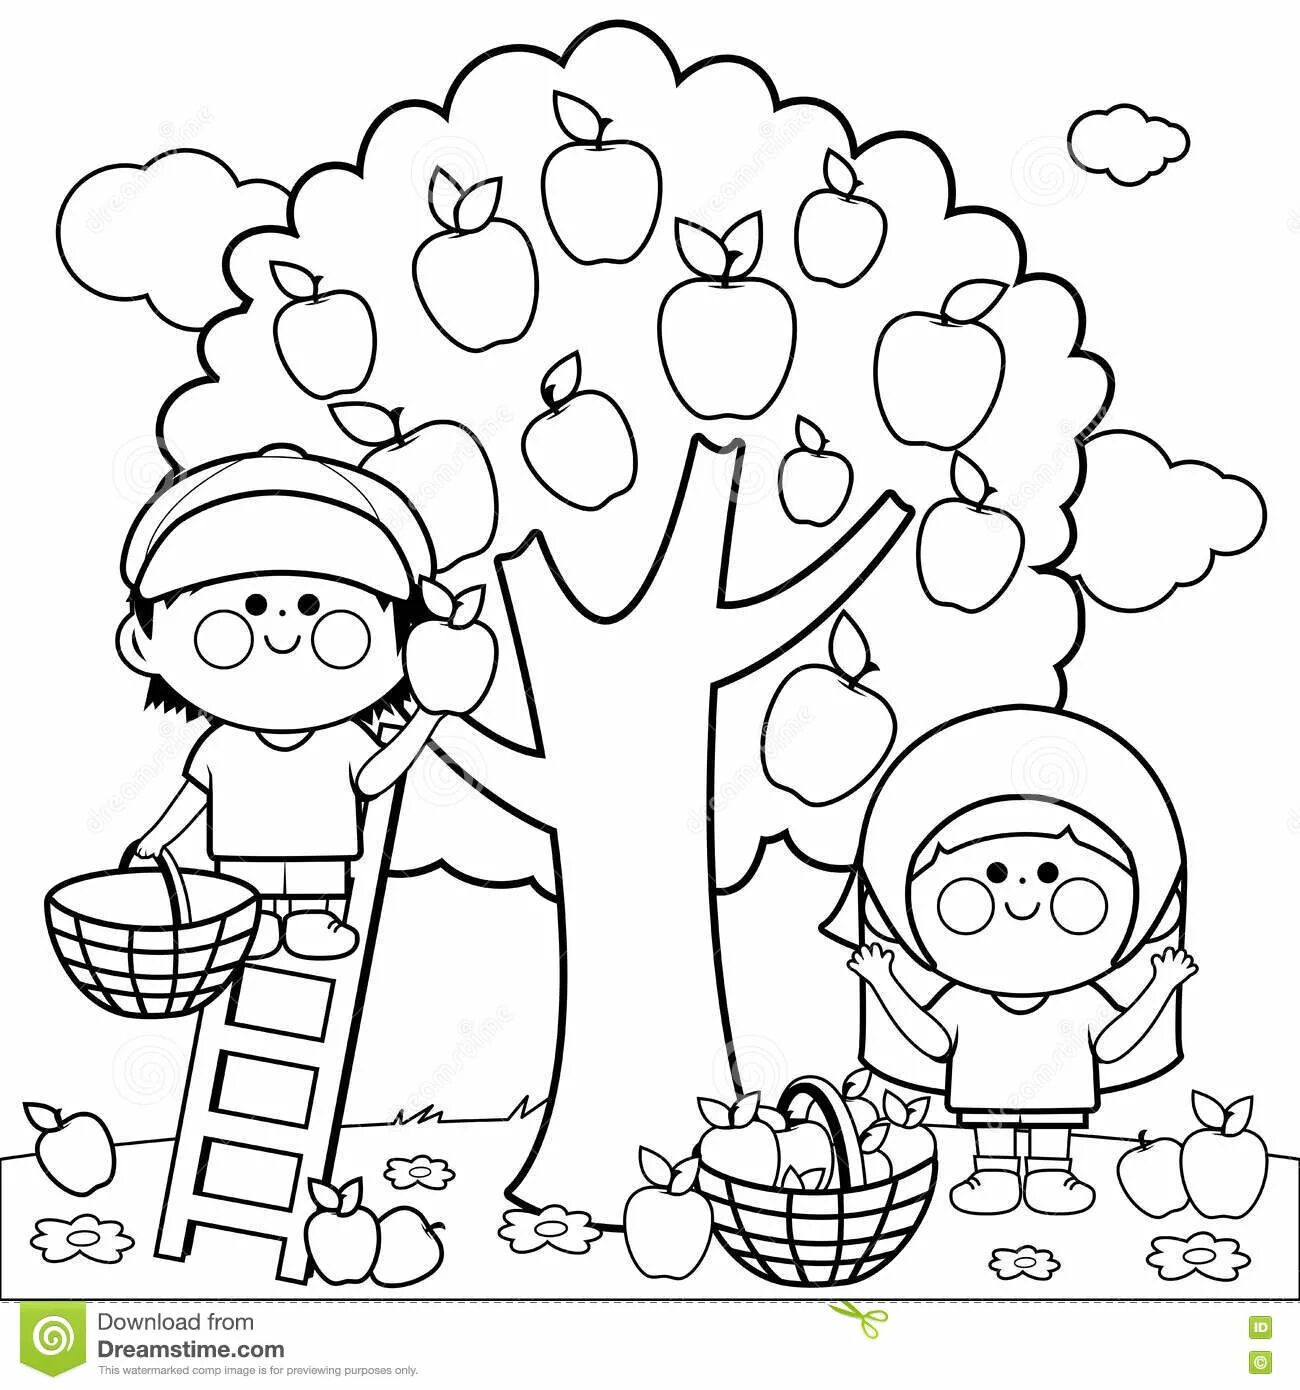 Color-frenzy garden coloring pages for kids